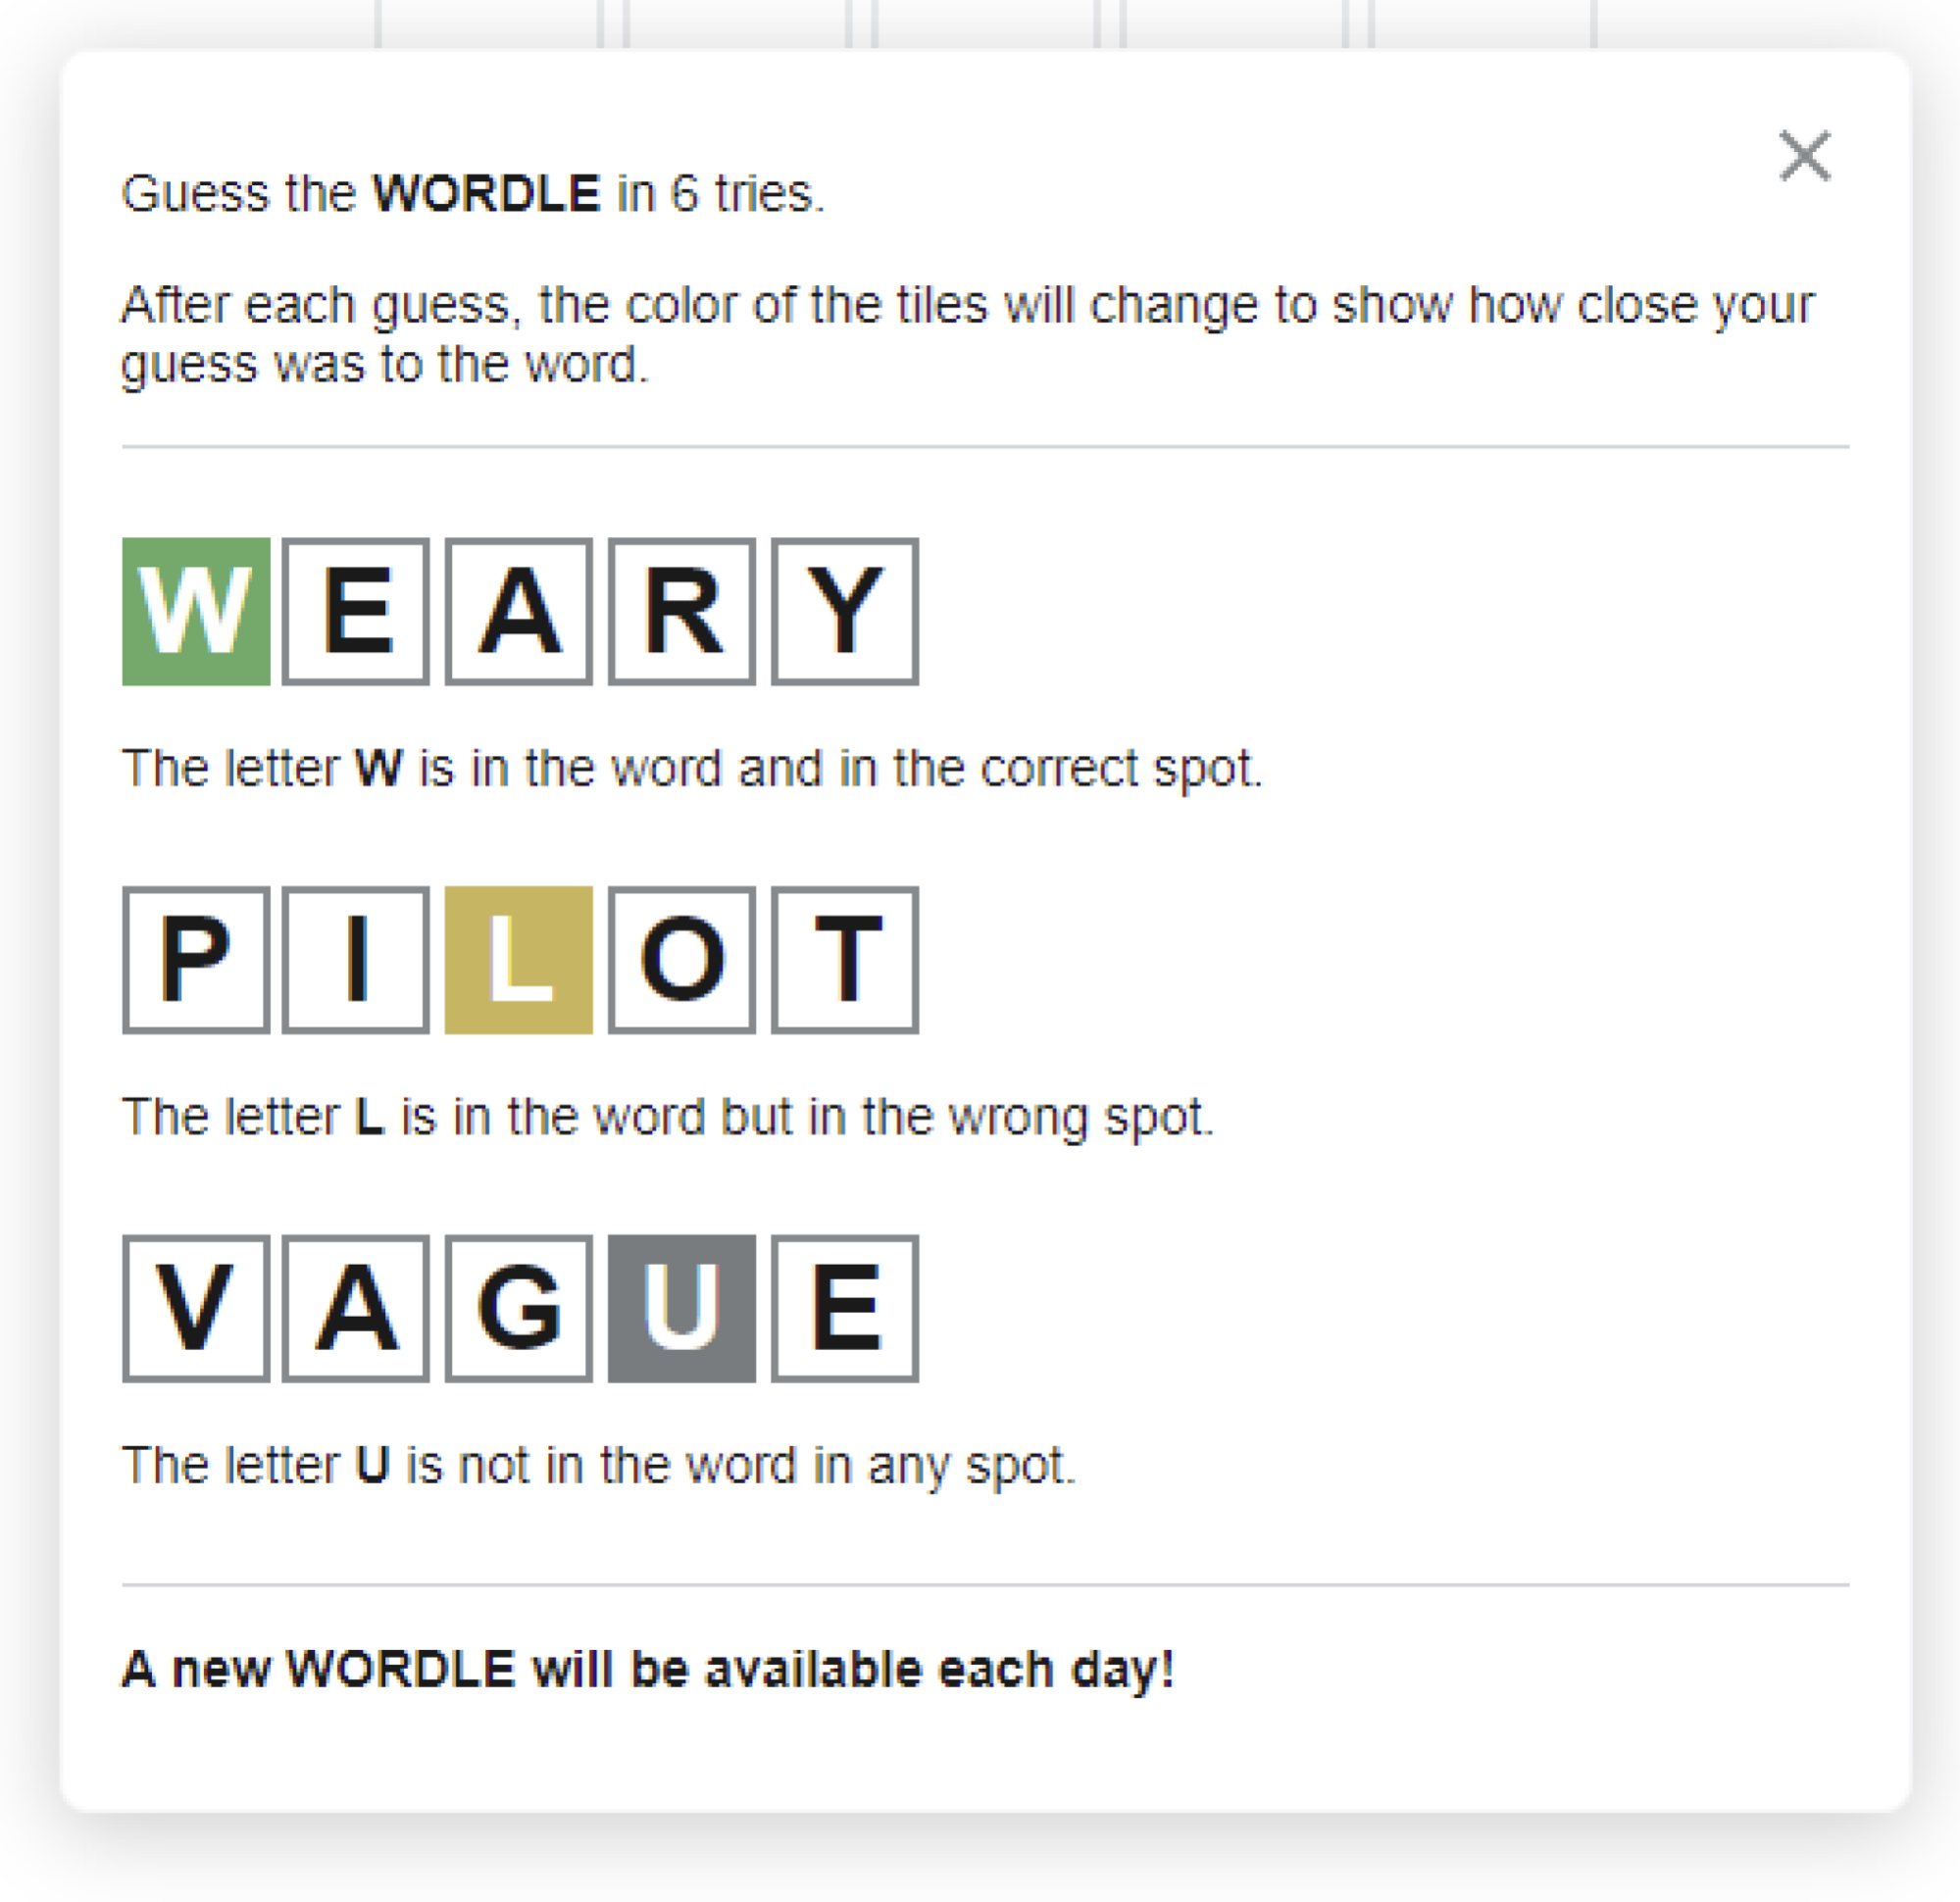 A screenshot of the Wordle tutorial graphic. The text at the top reads: "Guess the WORDLE in 6 tries. After each guess, the color of the tiles will change to show how close your guess was to the word." Three examples follow. In the first, we see the word "WEARY" spelled out with one letter in each of five boxes. The "W" box is colored green. Text below reads: "The letter W is in the word and in the correct spot." In the second, we see "PILOT" spelled out in the same format, and the "L" box is colored yellow. The text below reads: "The letter L is in the word but in the wrong spot." In the third and final example, the word "VAGUE" is spelled out and the box for the letter "U" is colored gray. The text below that reads: "The letter U is not in the word in any spot." Text at the bottom of the window reads: "A new WORDLE will be available each day."